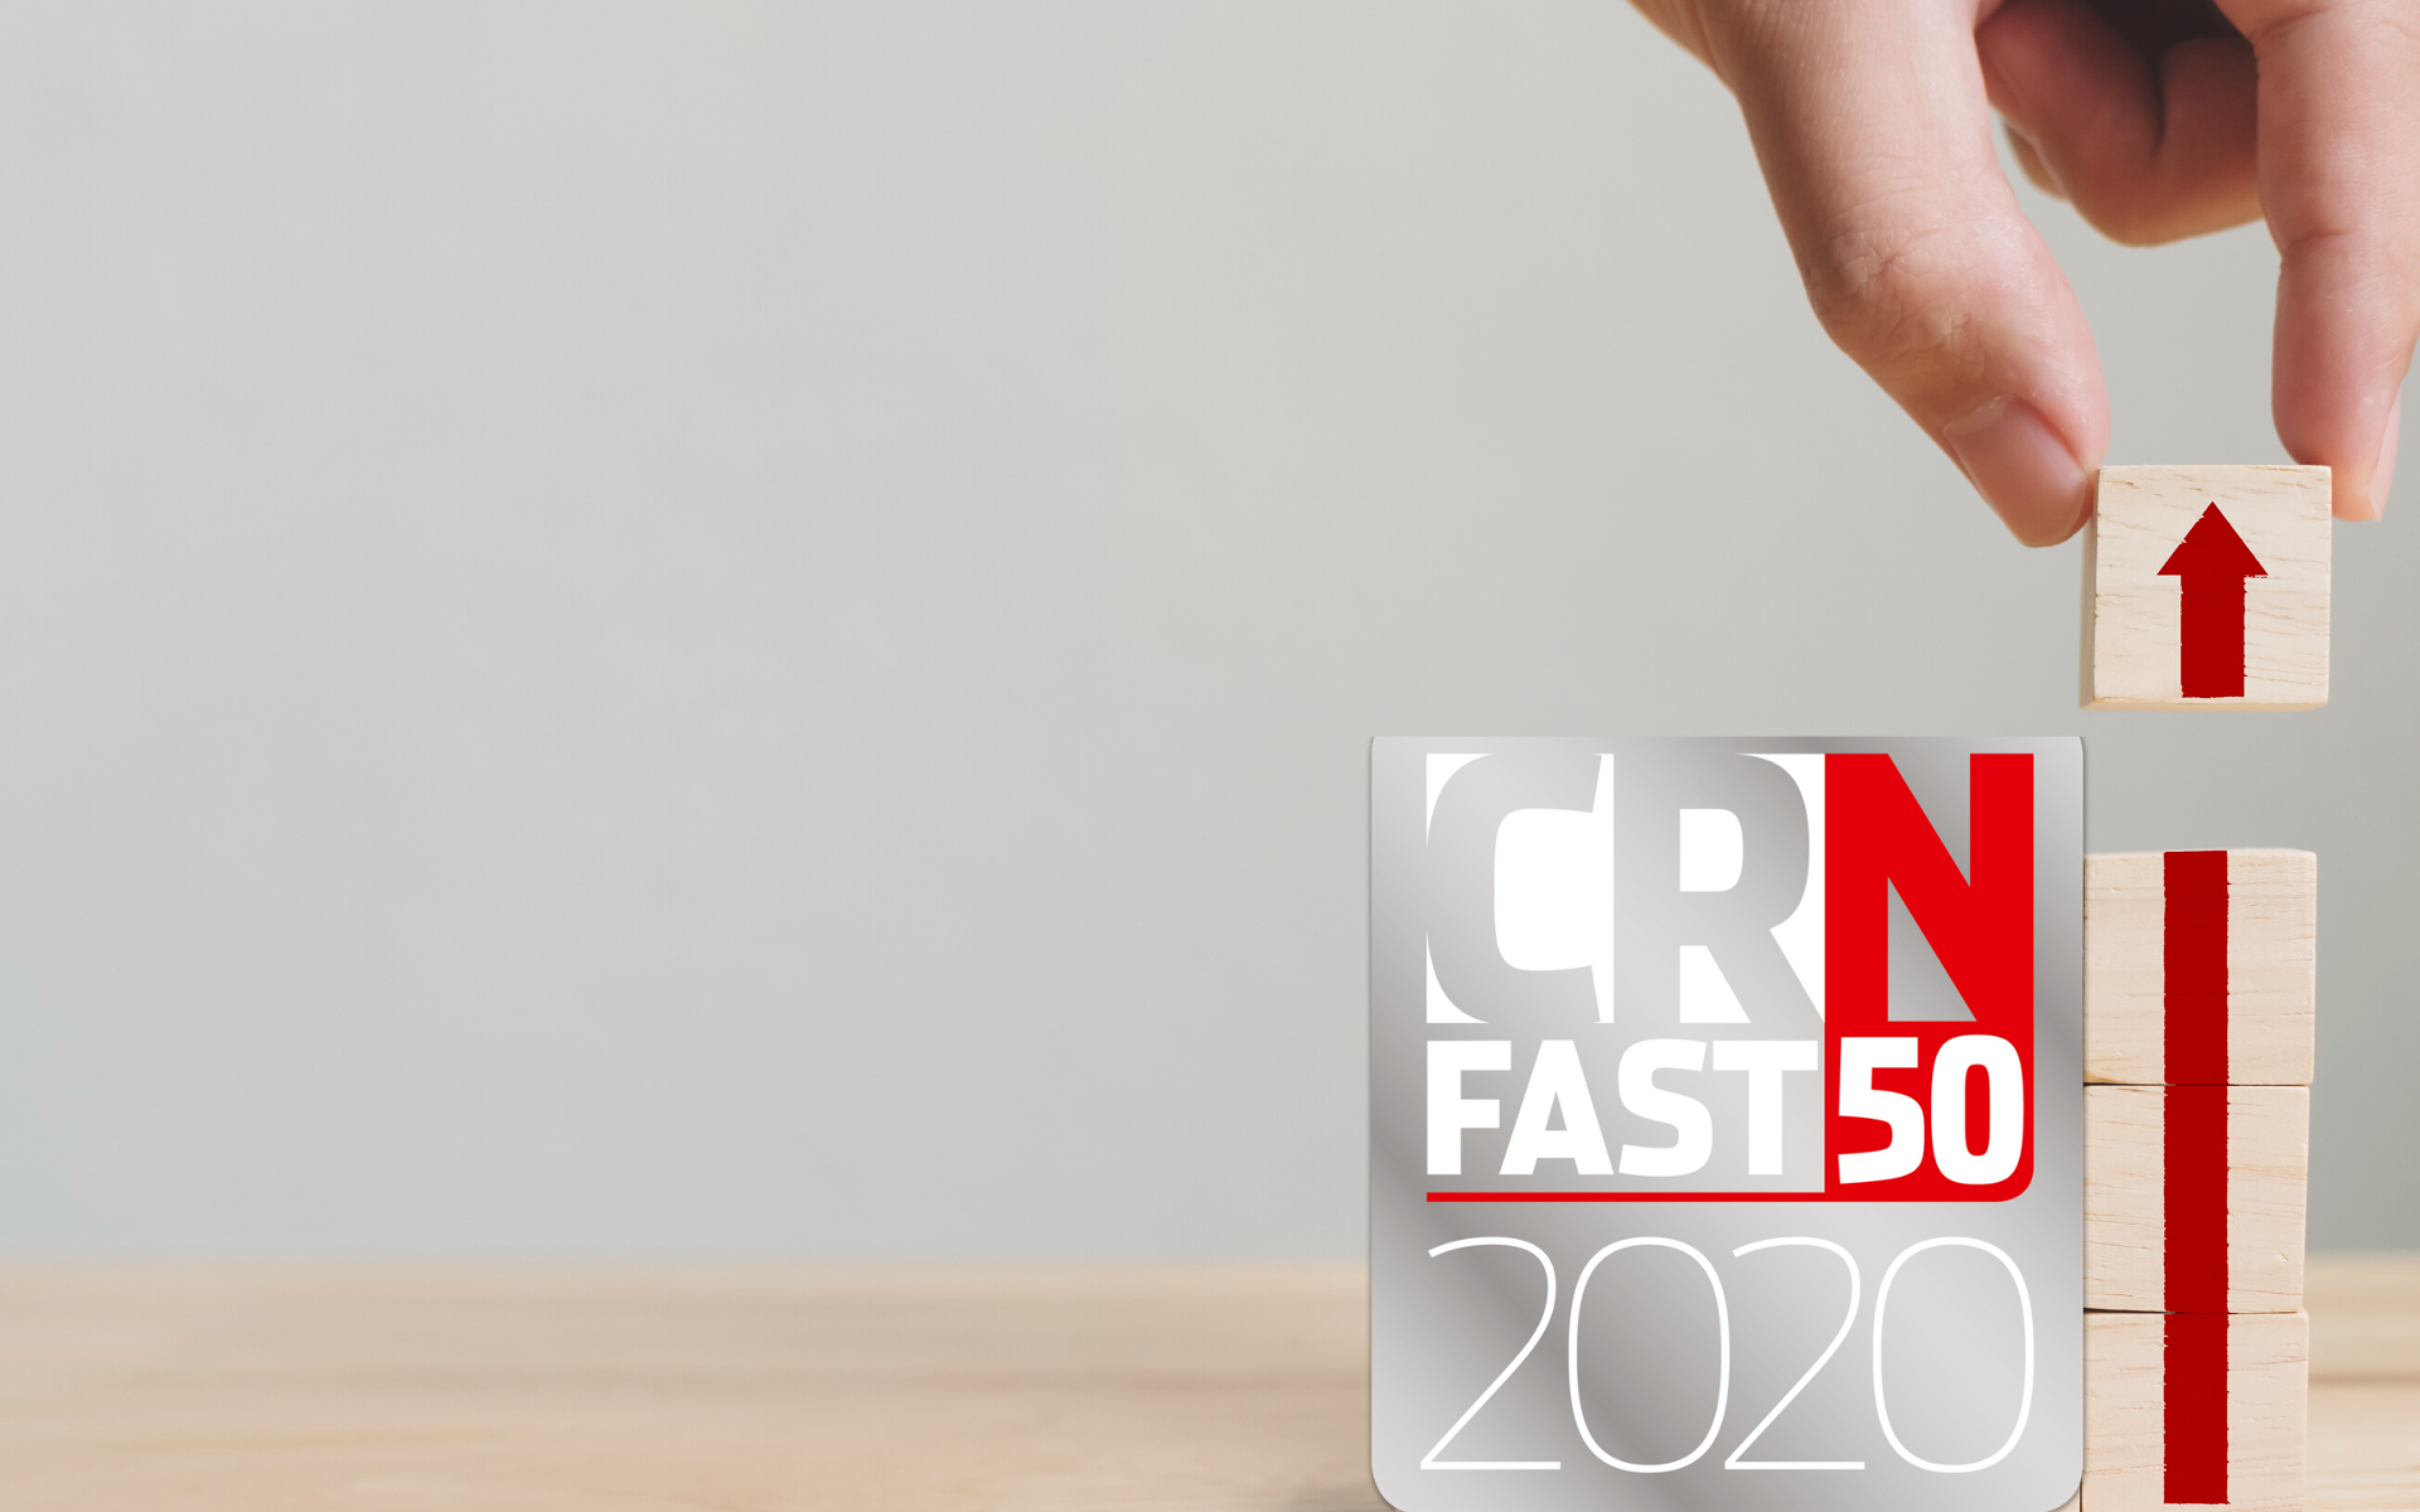 ICT Networks makes CRN Fast 50 & receives 